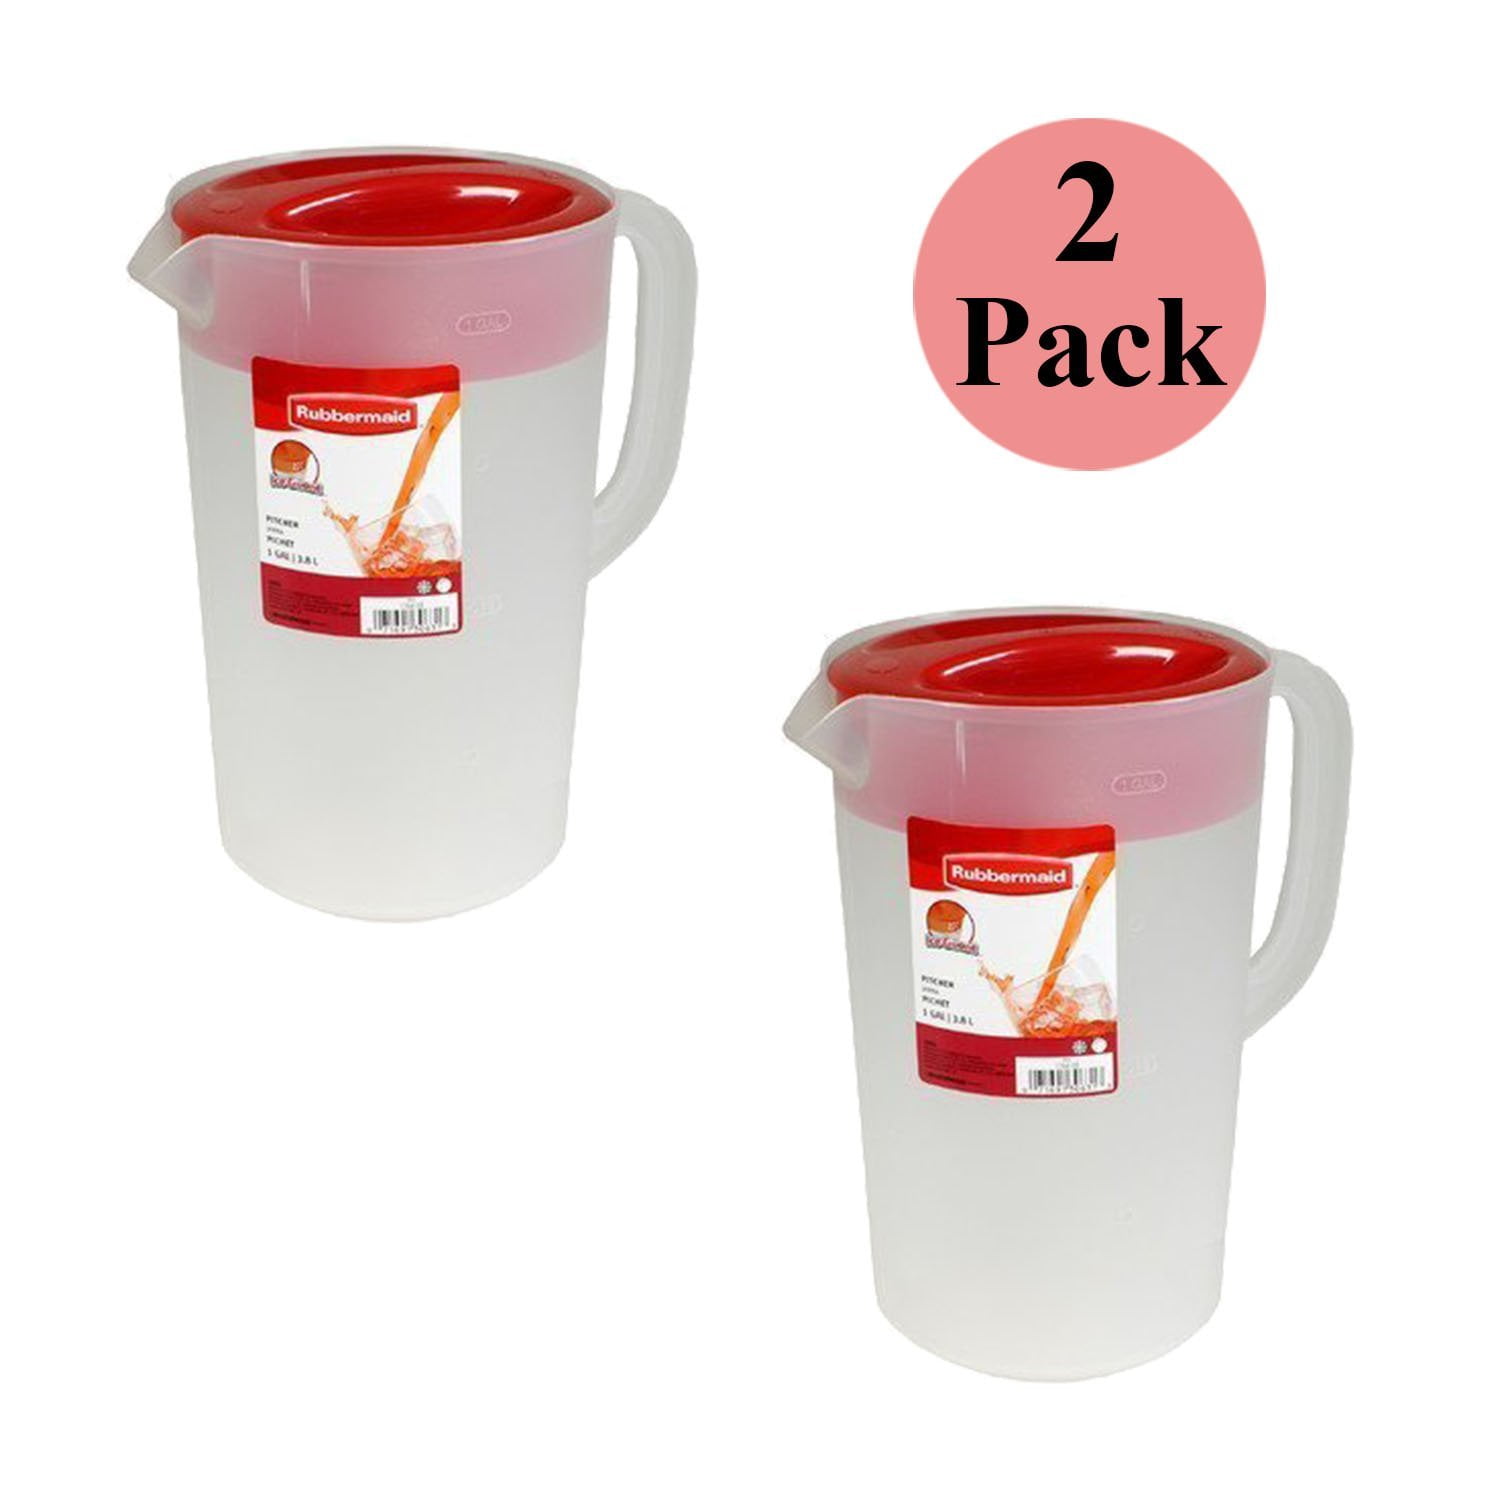 2 Qt. Clear Pitcher, Red Top - Rubbermaid - Lodging Kit Company